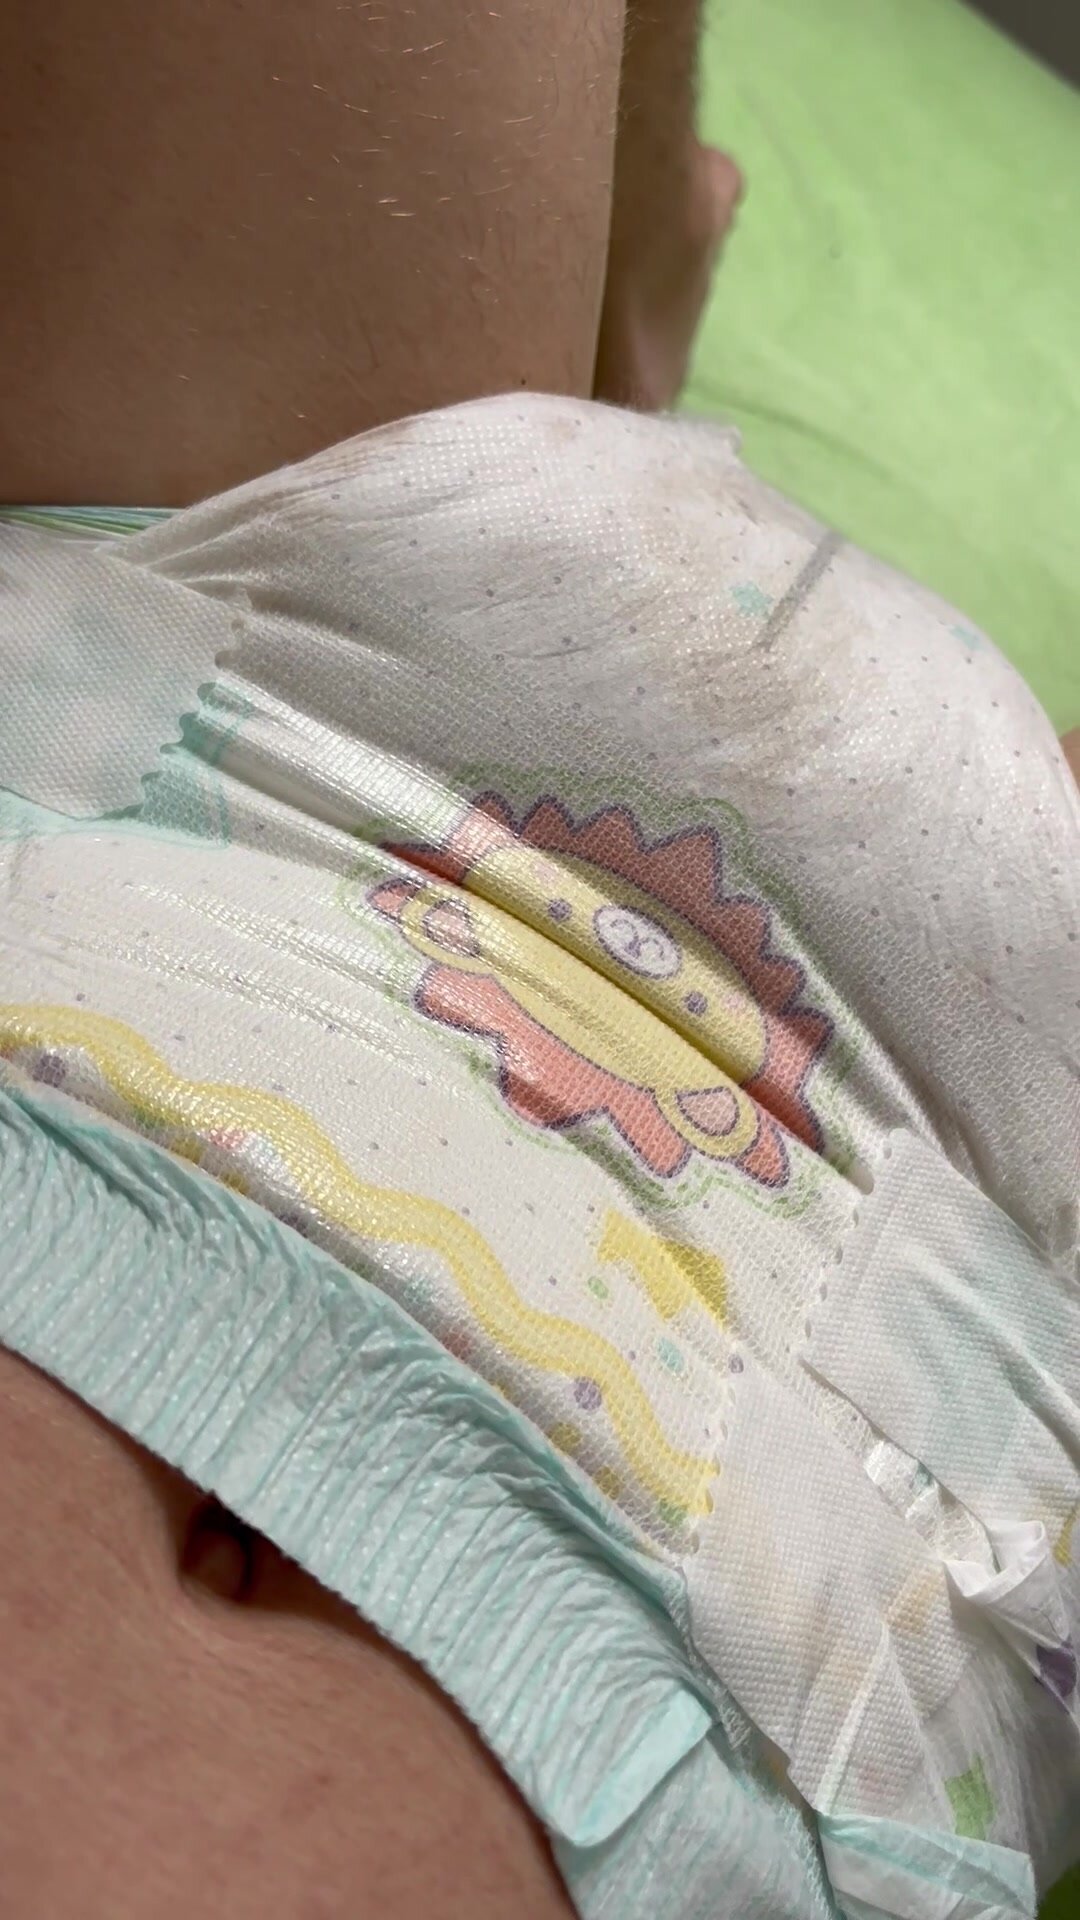 Messy diaper opening - video 3